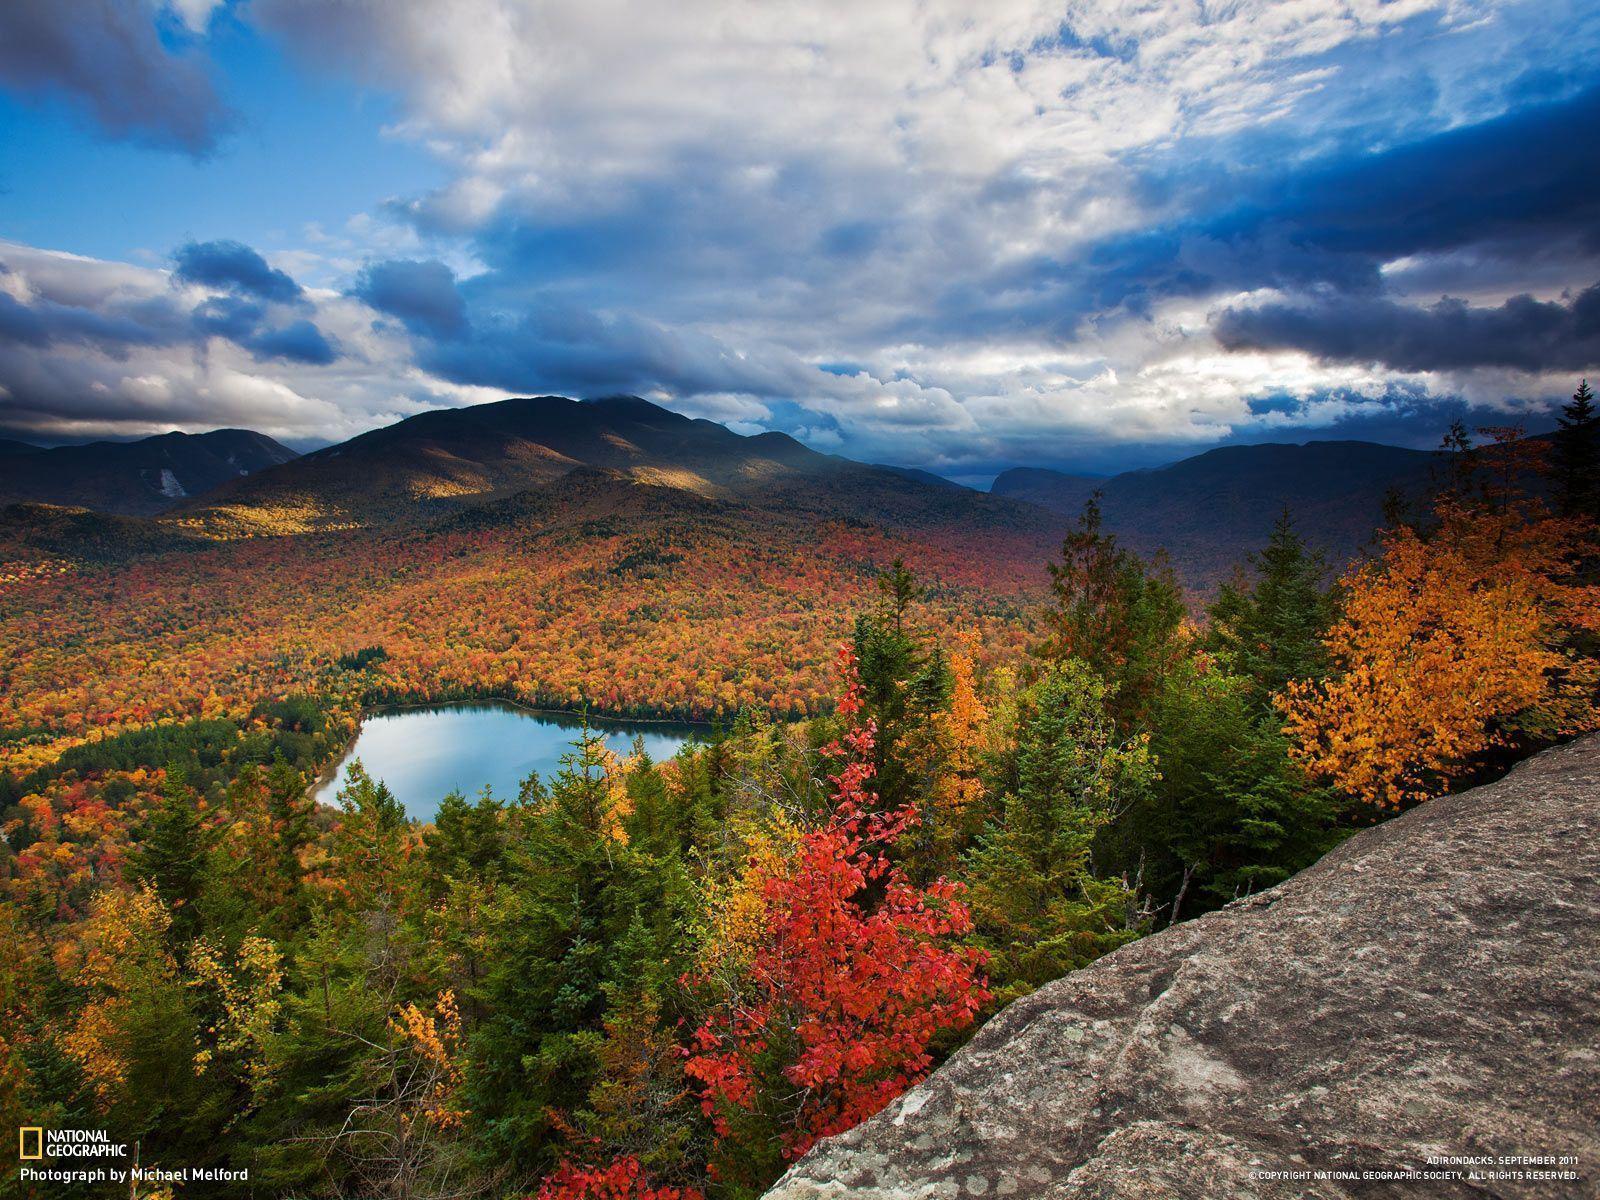 Adirondack Park Gallery, More From National